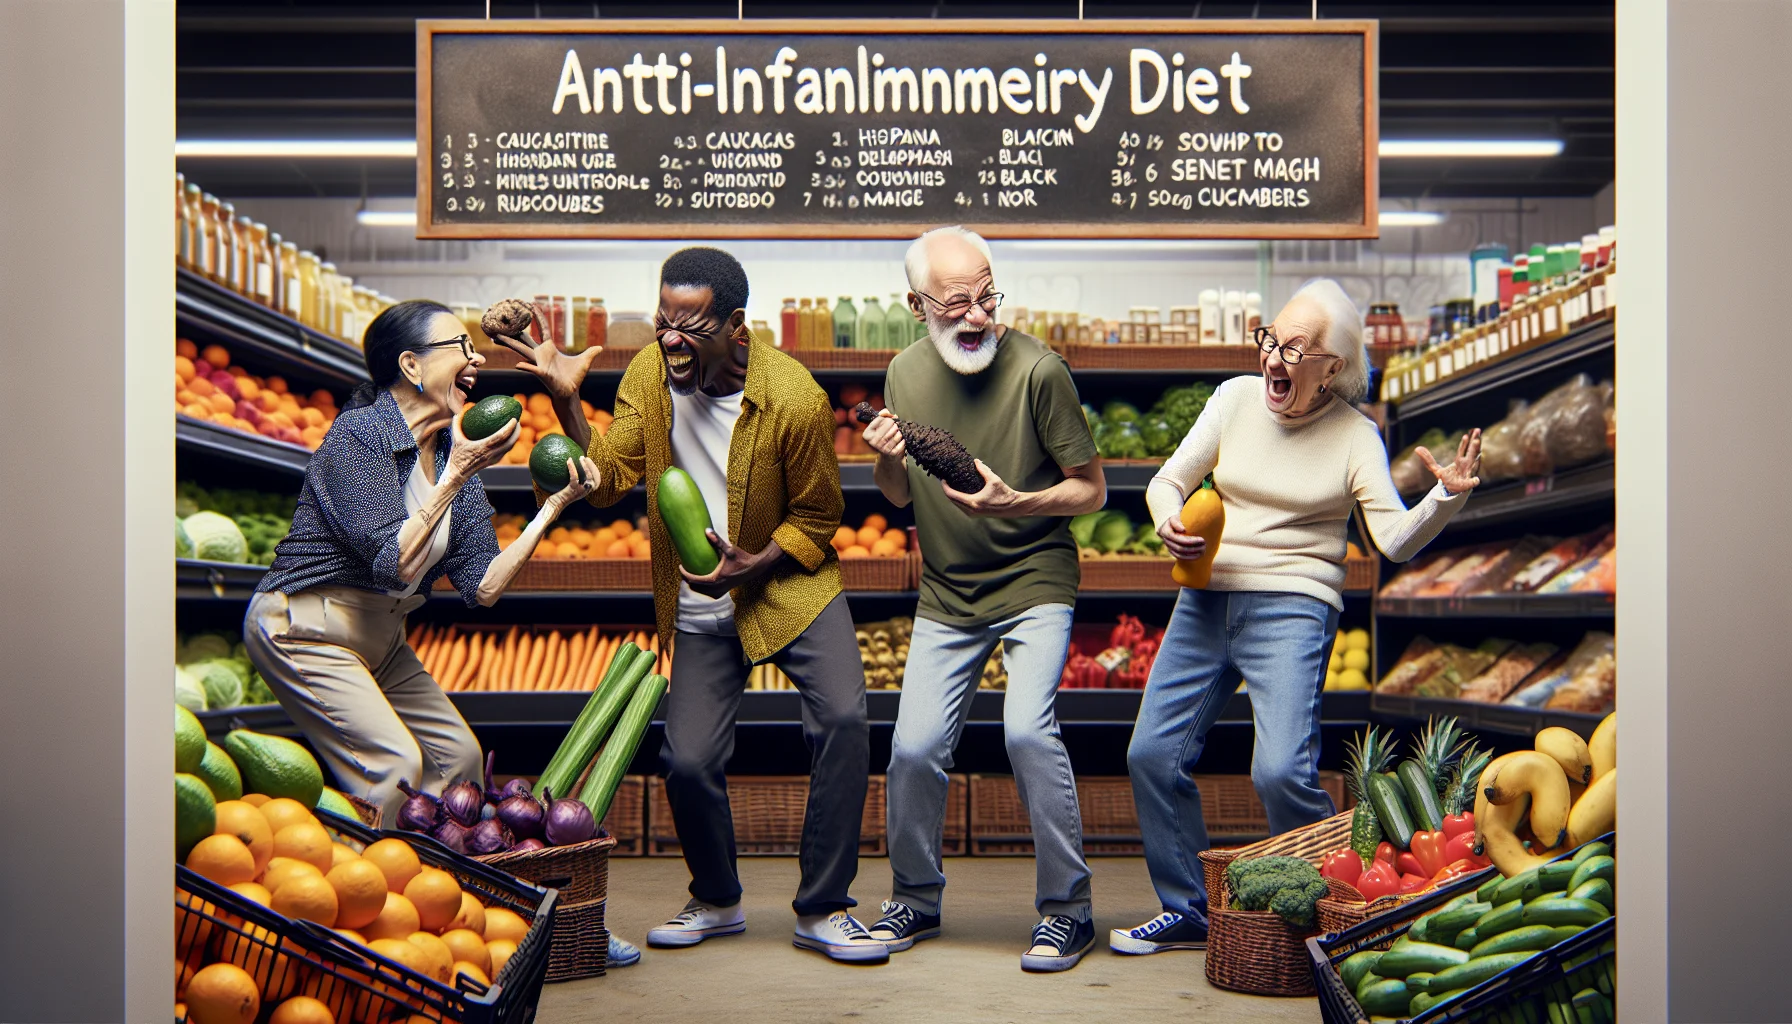 Imagine a quirky and humorous scene in a grocery store. A group of elderly friends, each from a different background - one Caucasian, one Hispanic, one Black, and one South Asian - are shopping together for their anti-inflammatory diet groceries. They are animatedly deciding between fruits, vegetables, and spices known for their anti-inflammatory properties, arguing about which ones to get. One of them is seen shaking a turmeric root like a maraca, another is balancing an avocado on his head, while the third one mockingly pretends to sword fight using long cucumbers, and the last one laughs wholeheartedly at their antics.